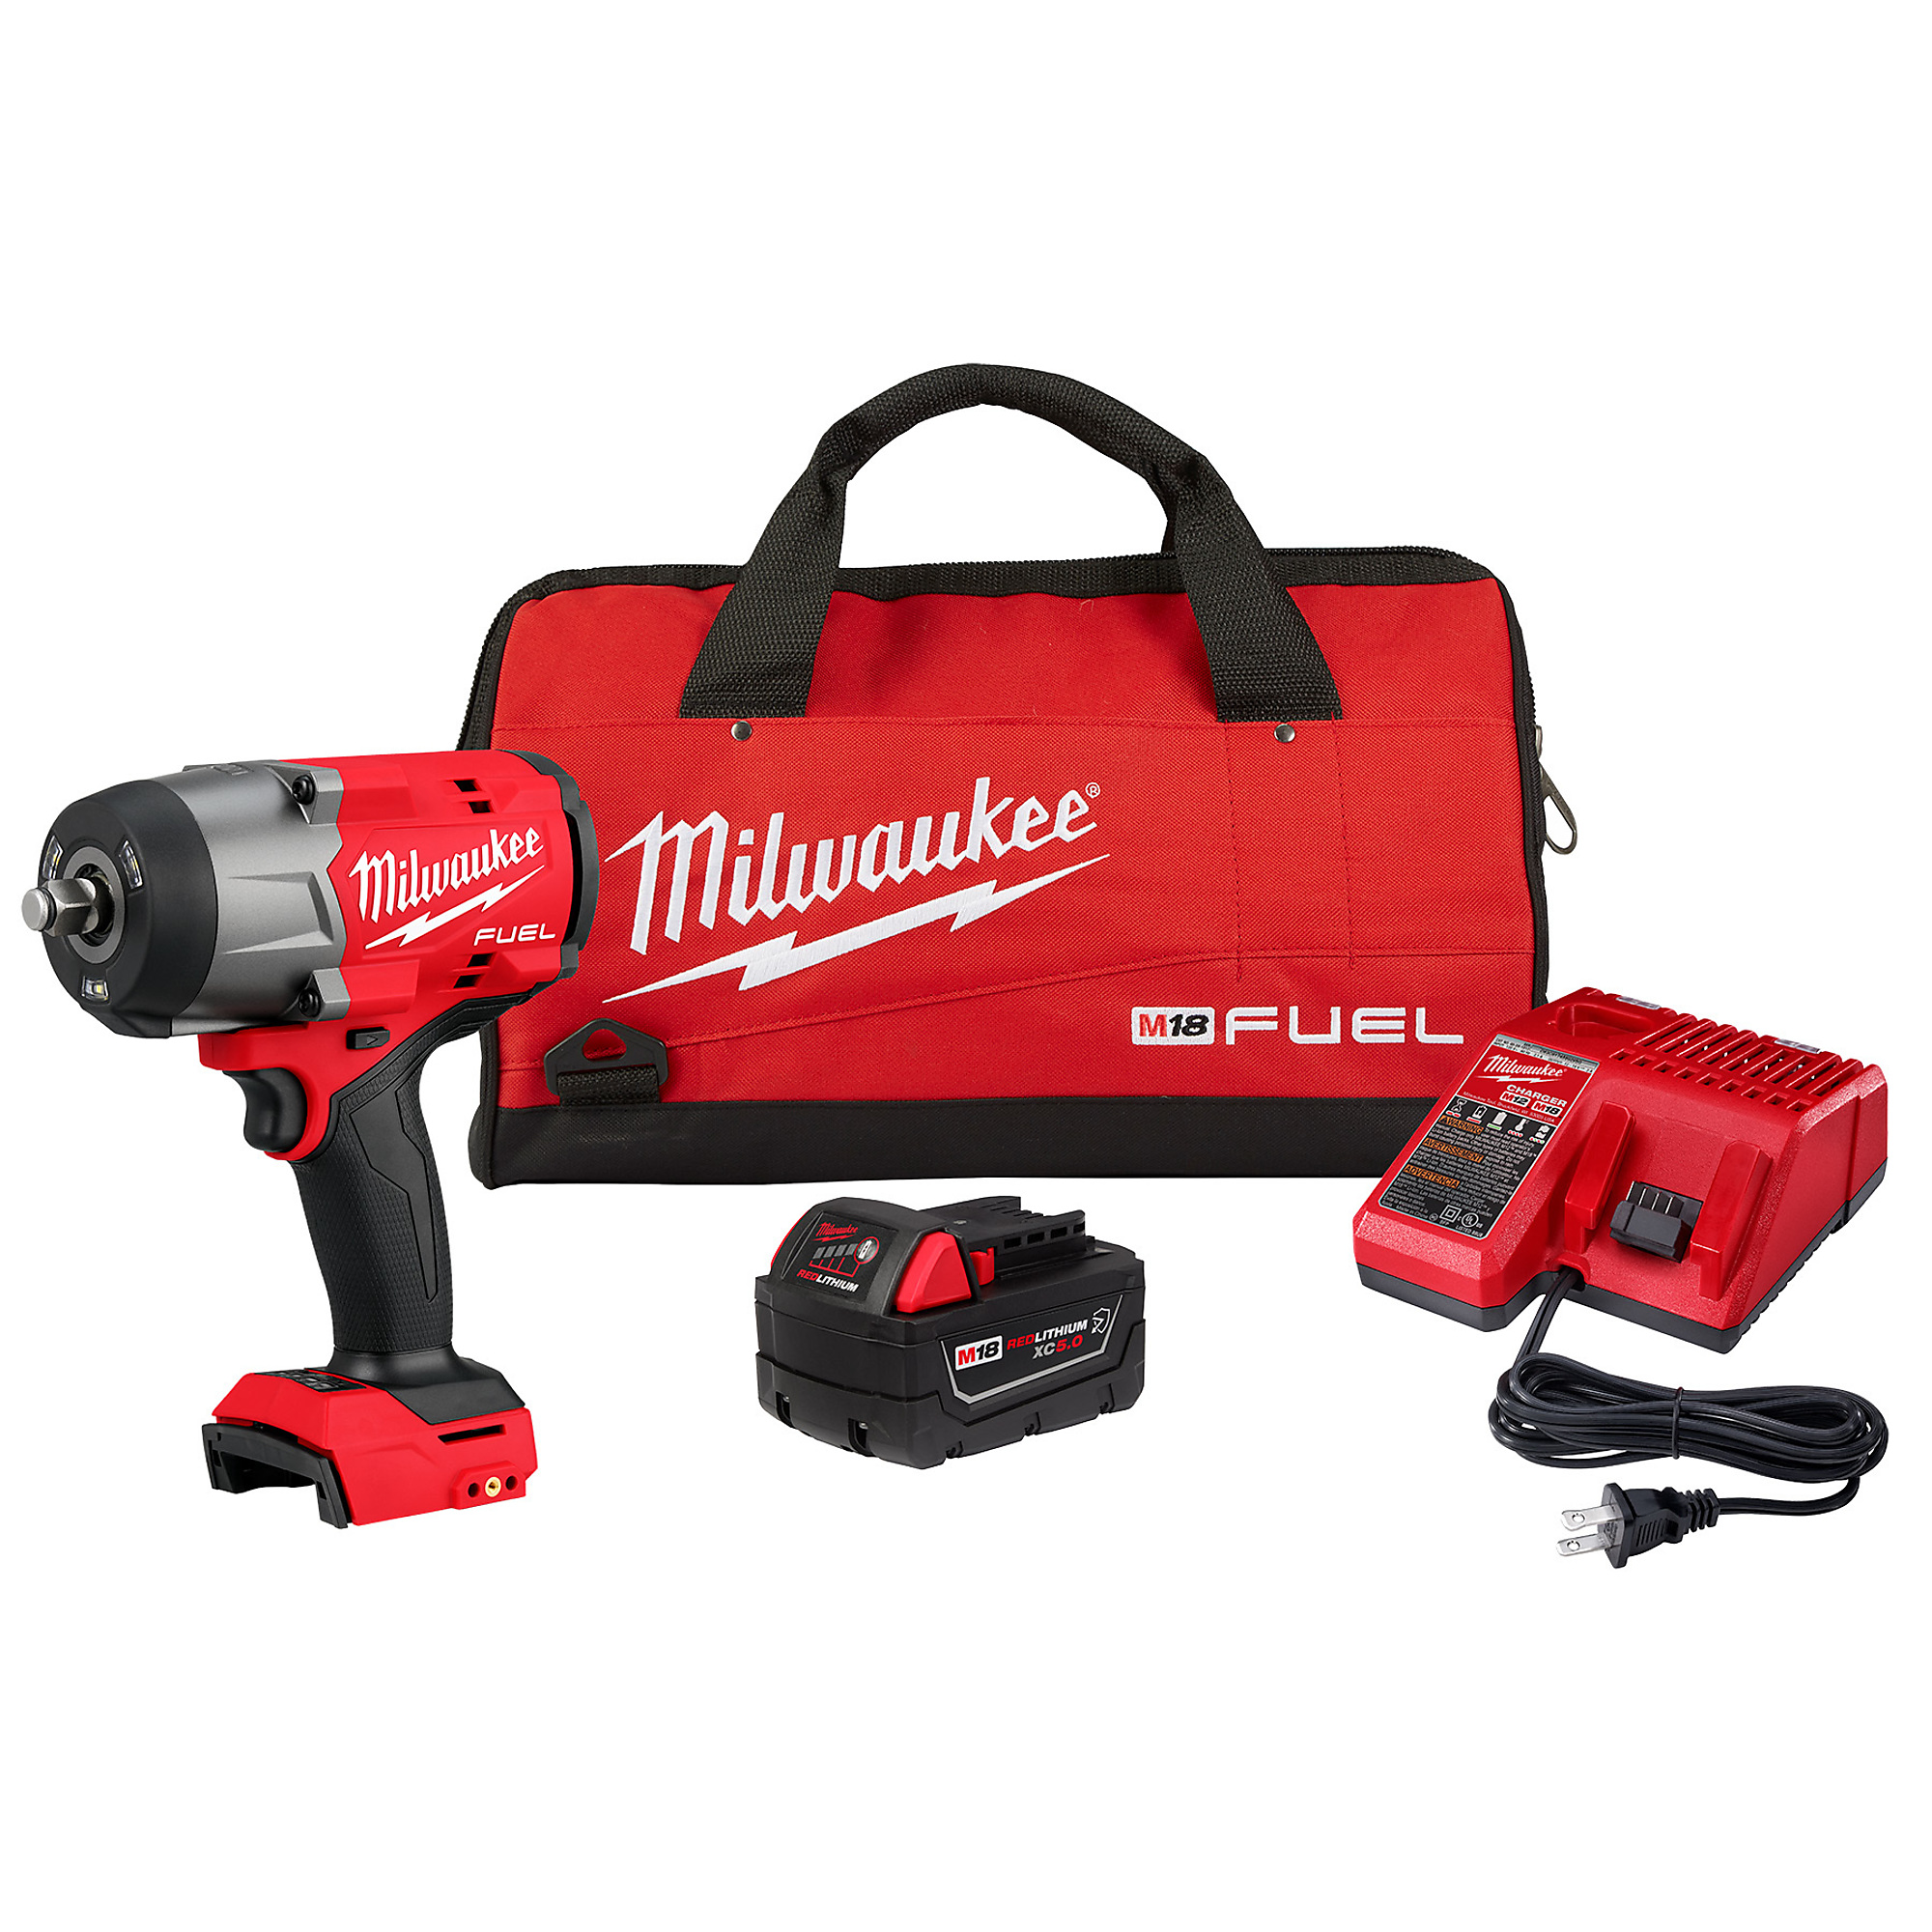 M18 1/2Inch High Torque Impact Wrench FrictRingKit, Drive Size 1/2 in, Volts 18 Battery Type Lithium-ion, Model - Milwaukee 2967-21B